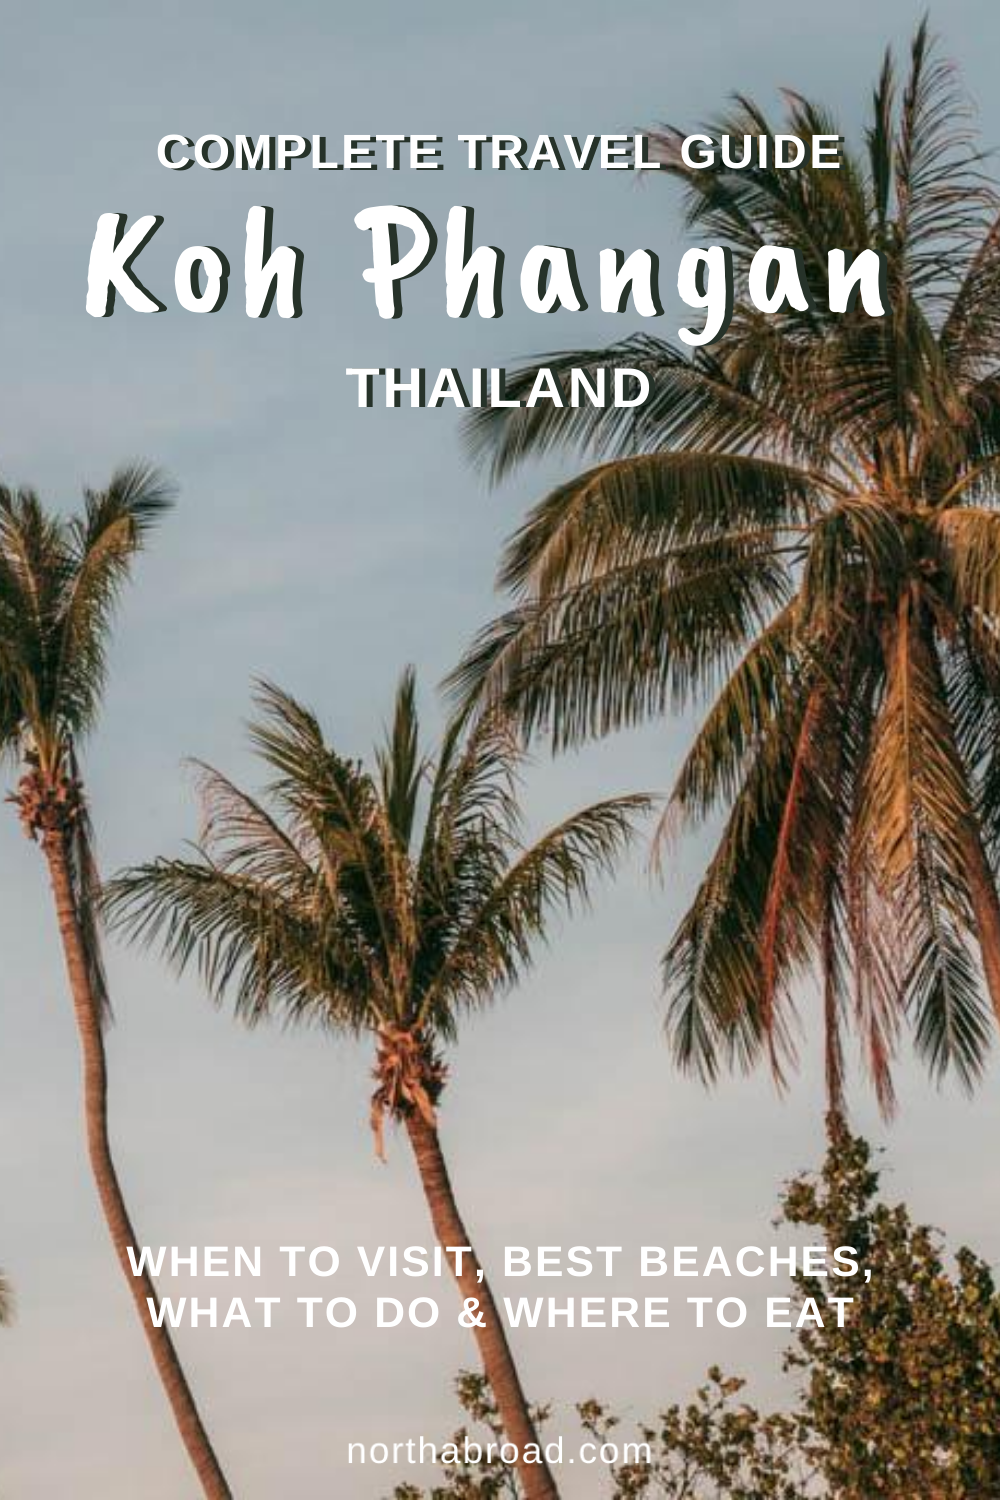 A Complete Travel Guide to Koh Phangan: Chill Out, Relax and Rejuvenate